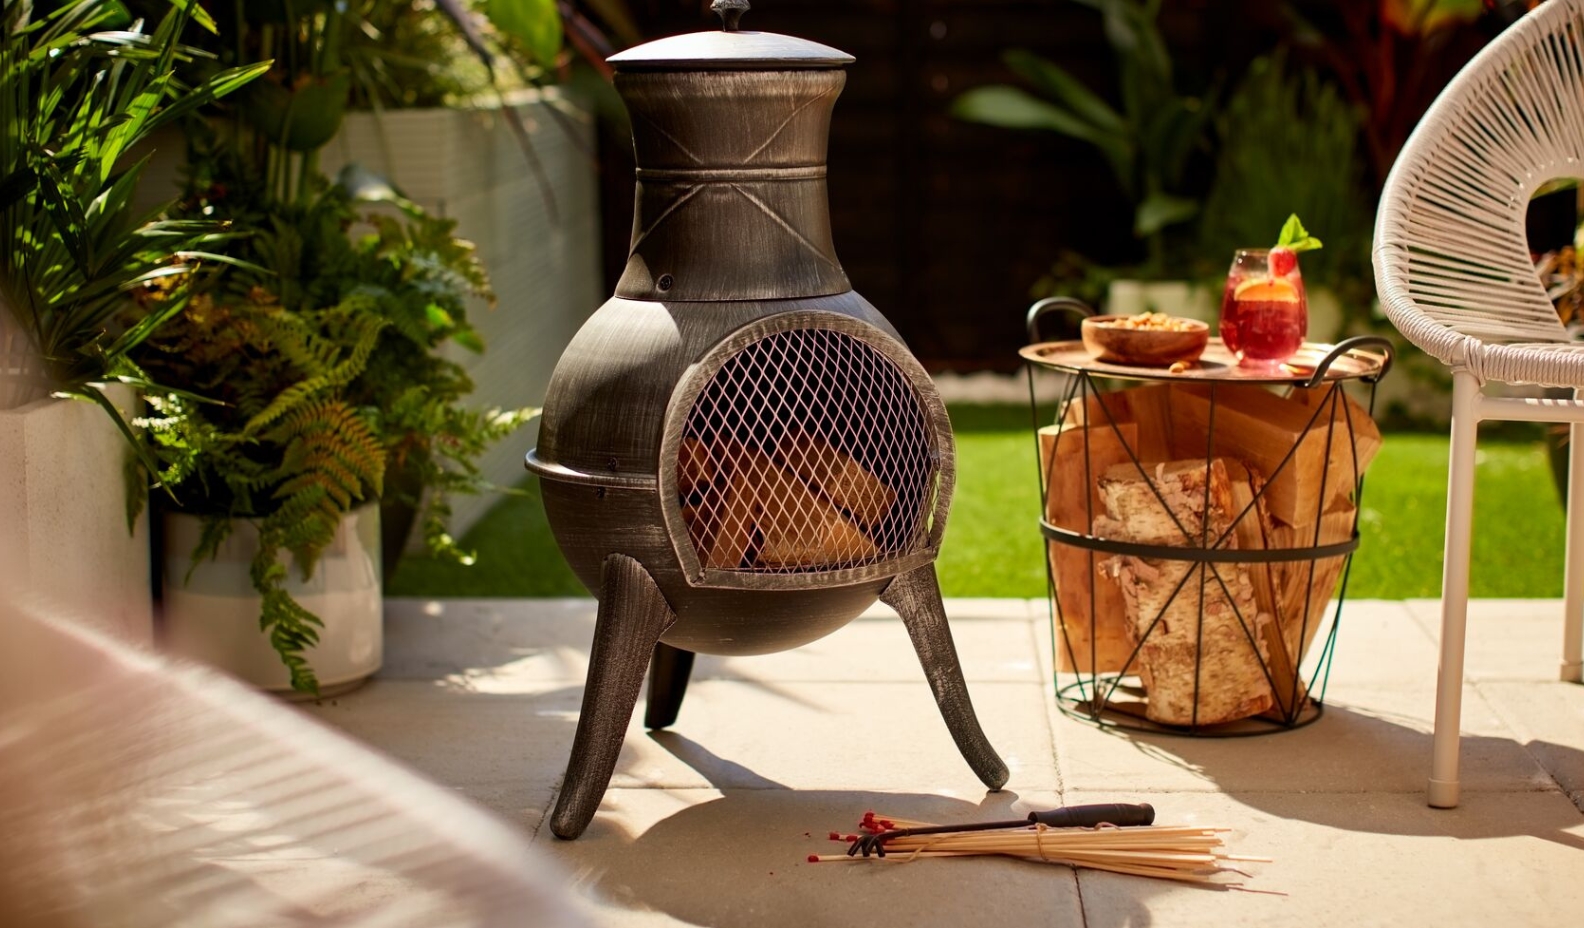 Outdoor Heating buying guide